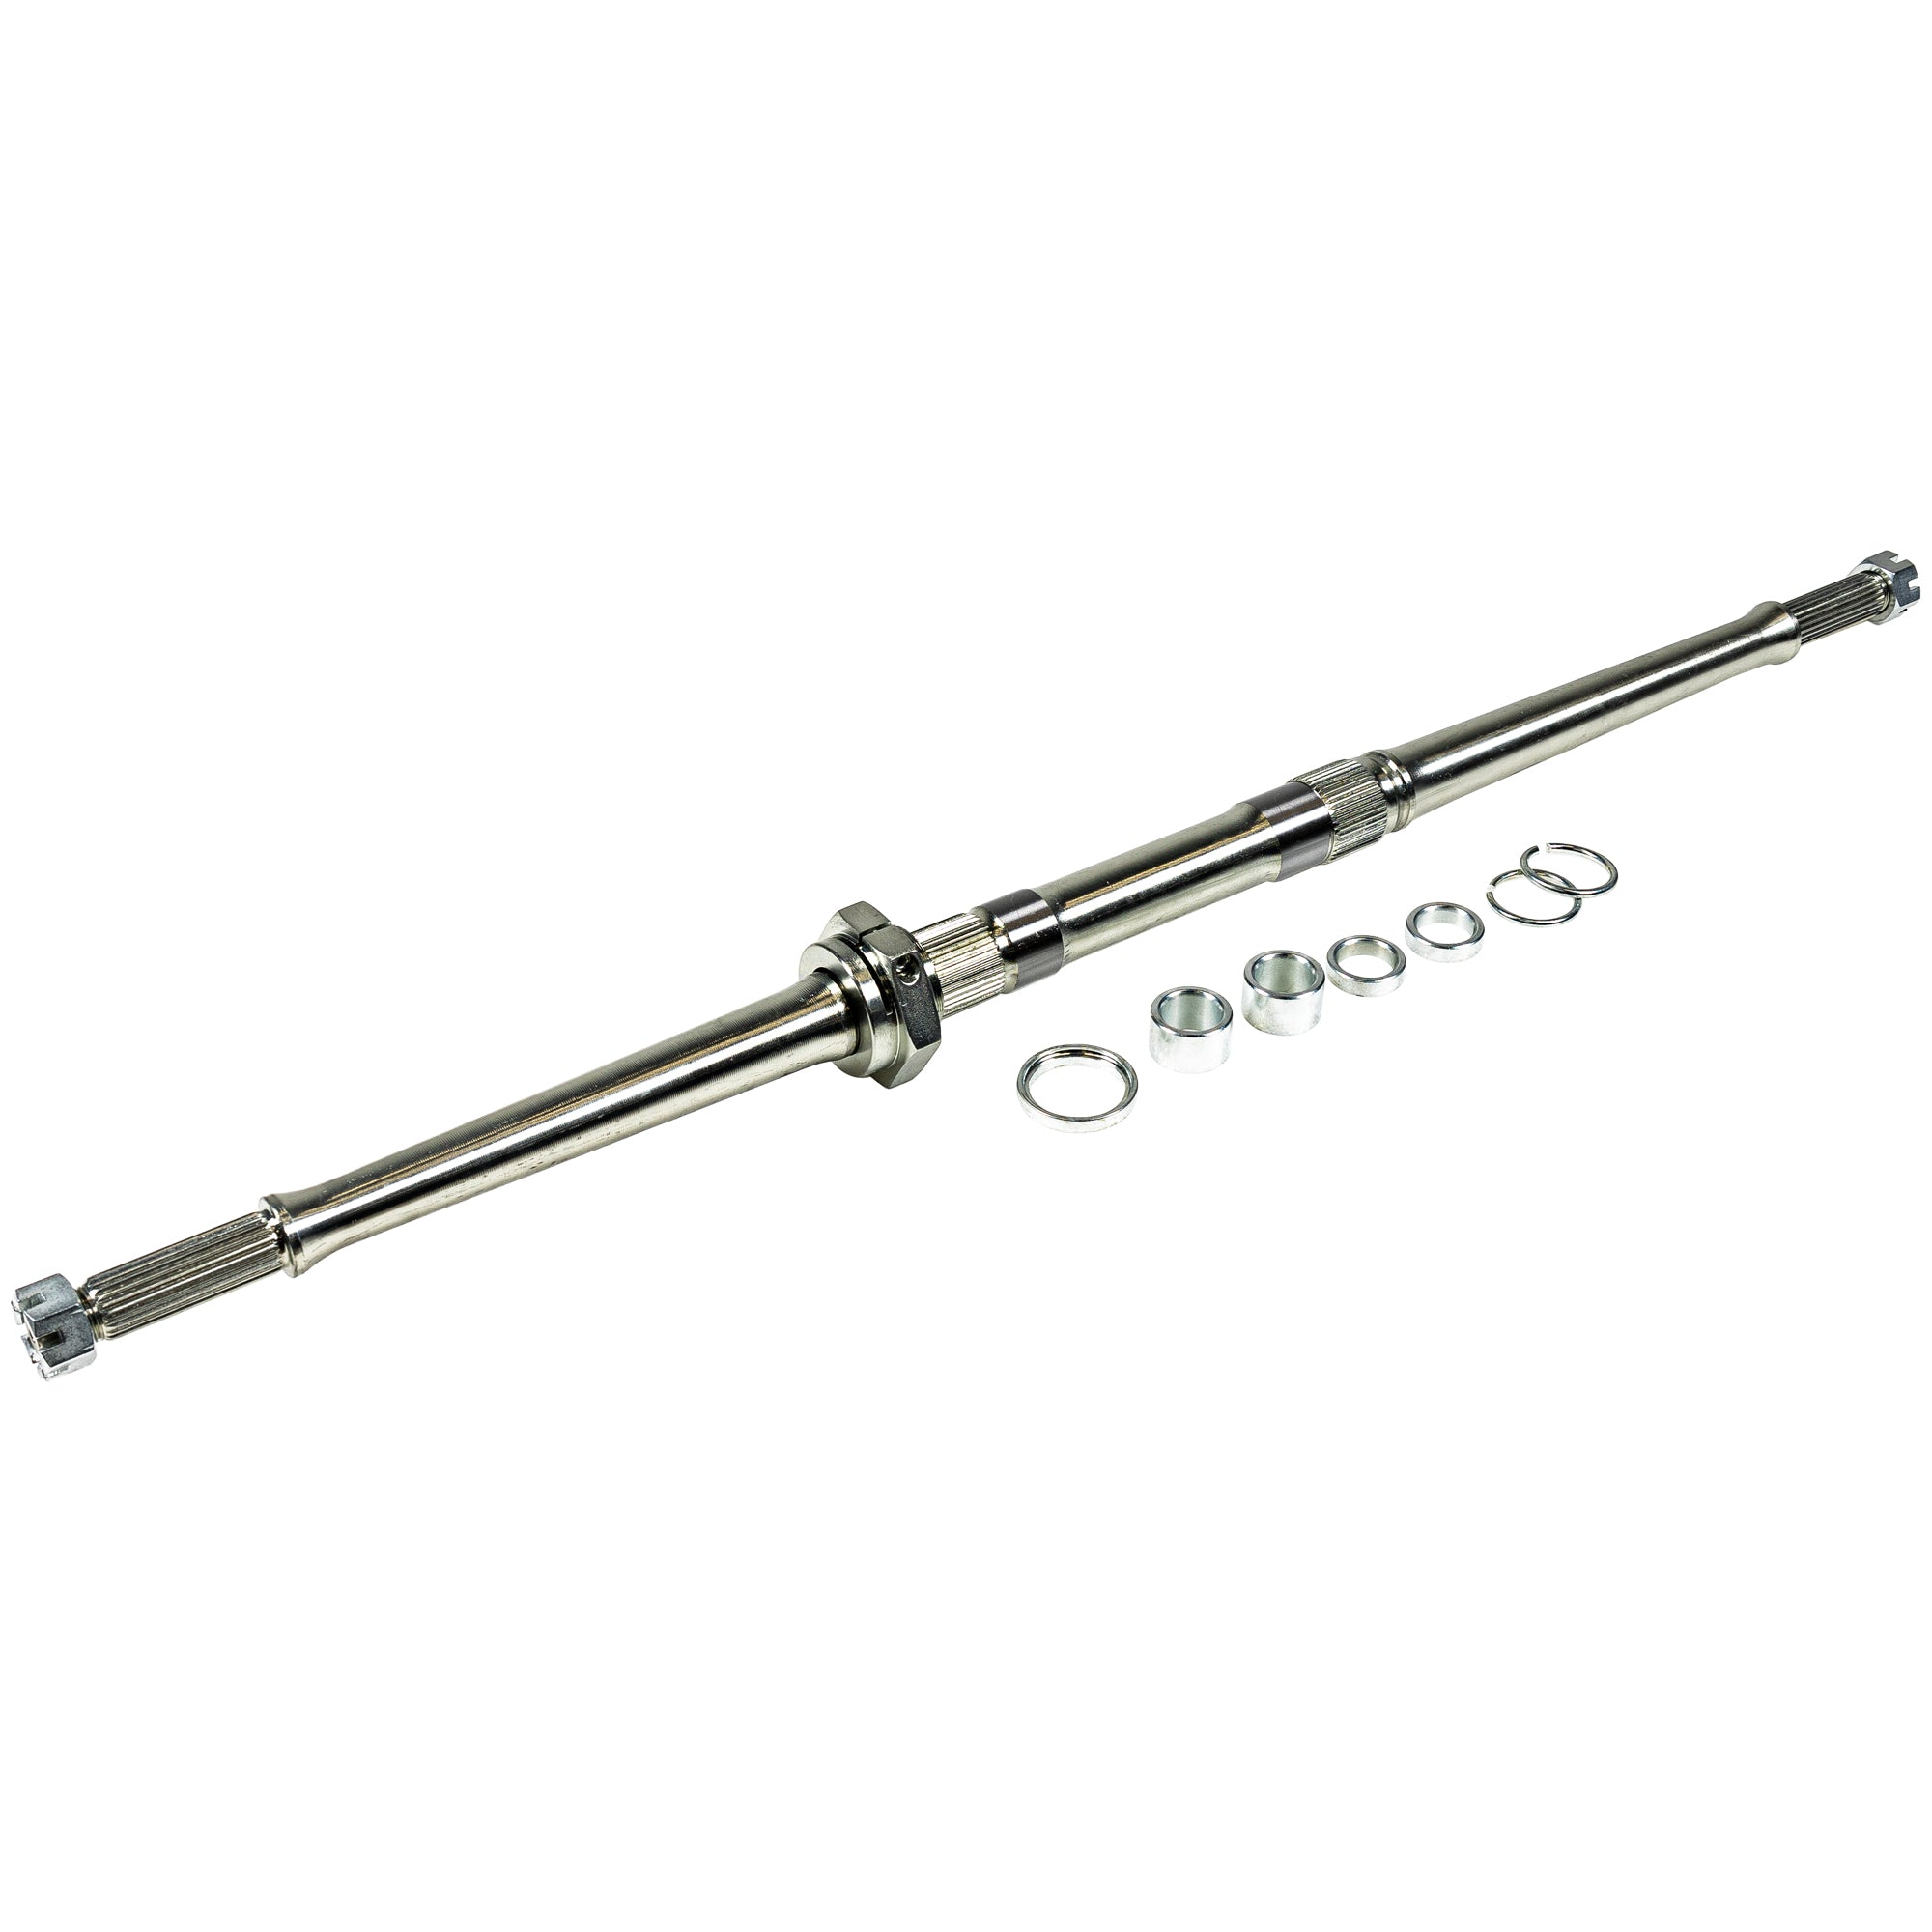 Adjustable Solid Rear Axle For Yamaha | Part Discounter